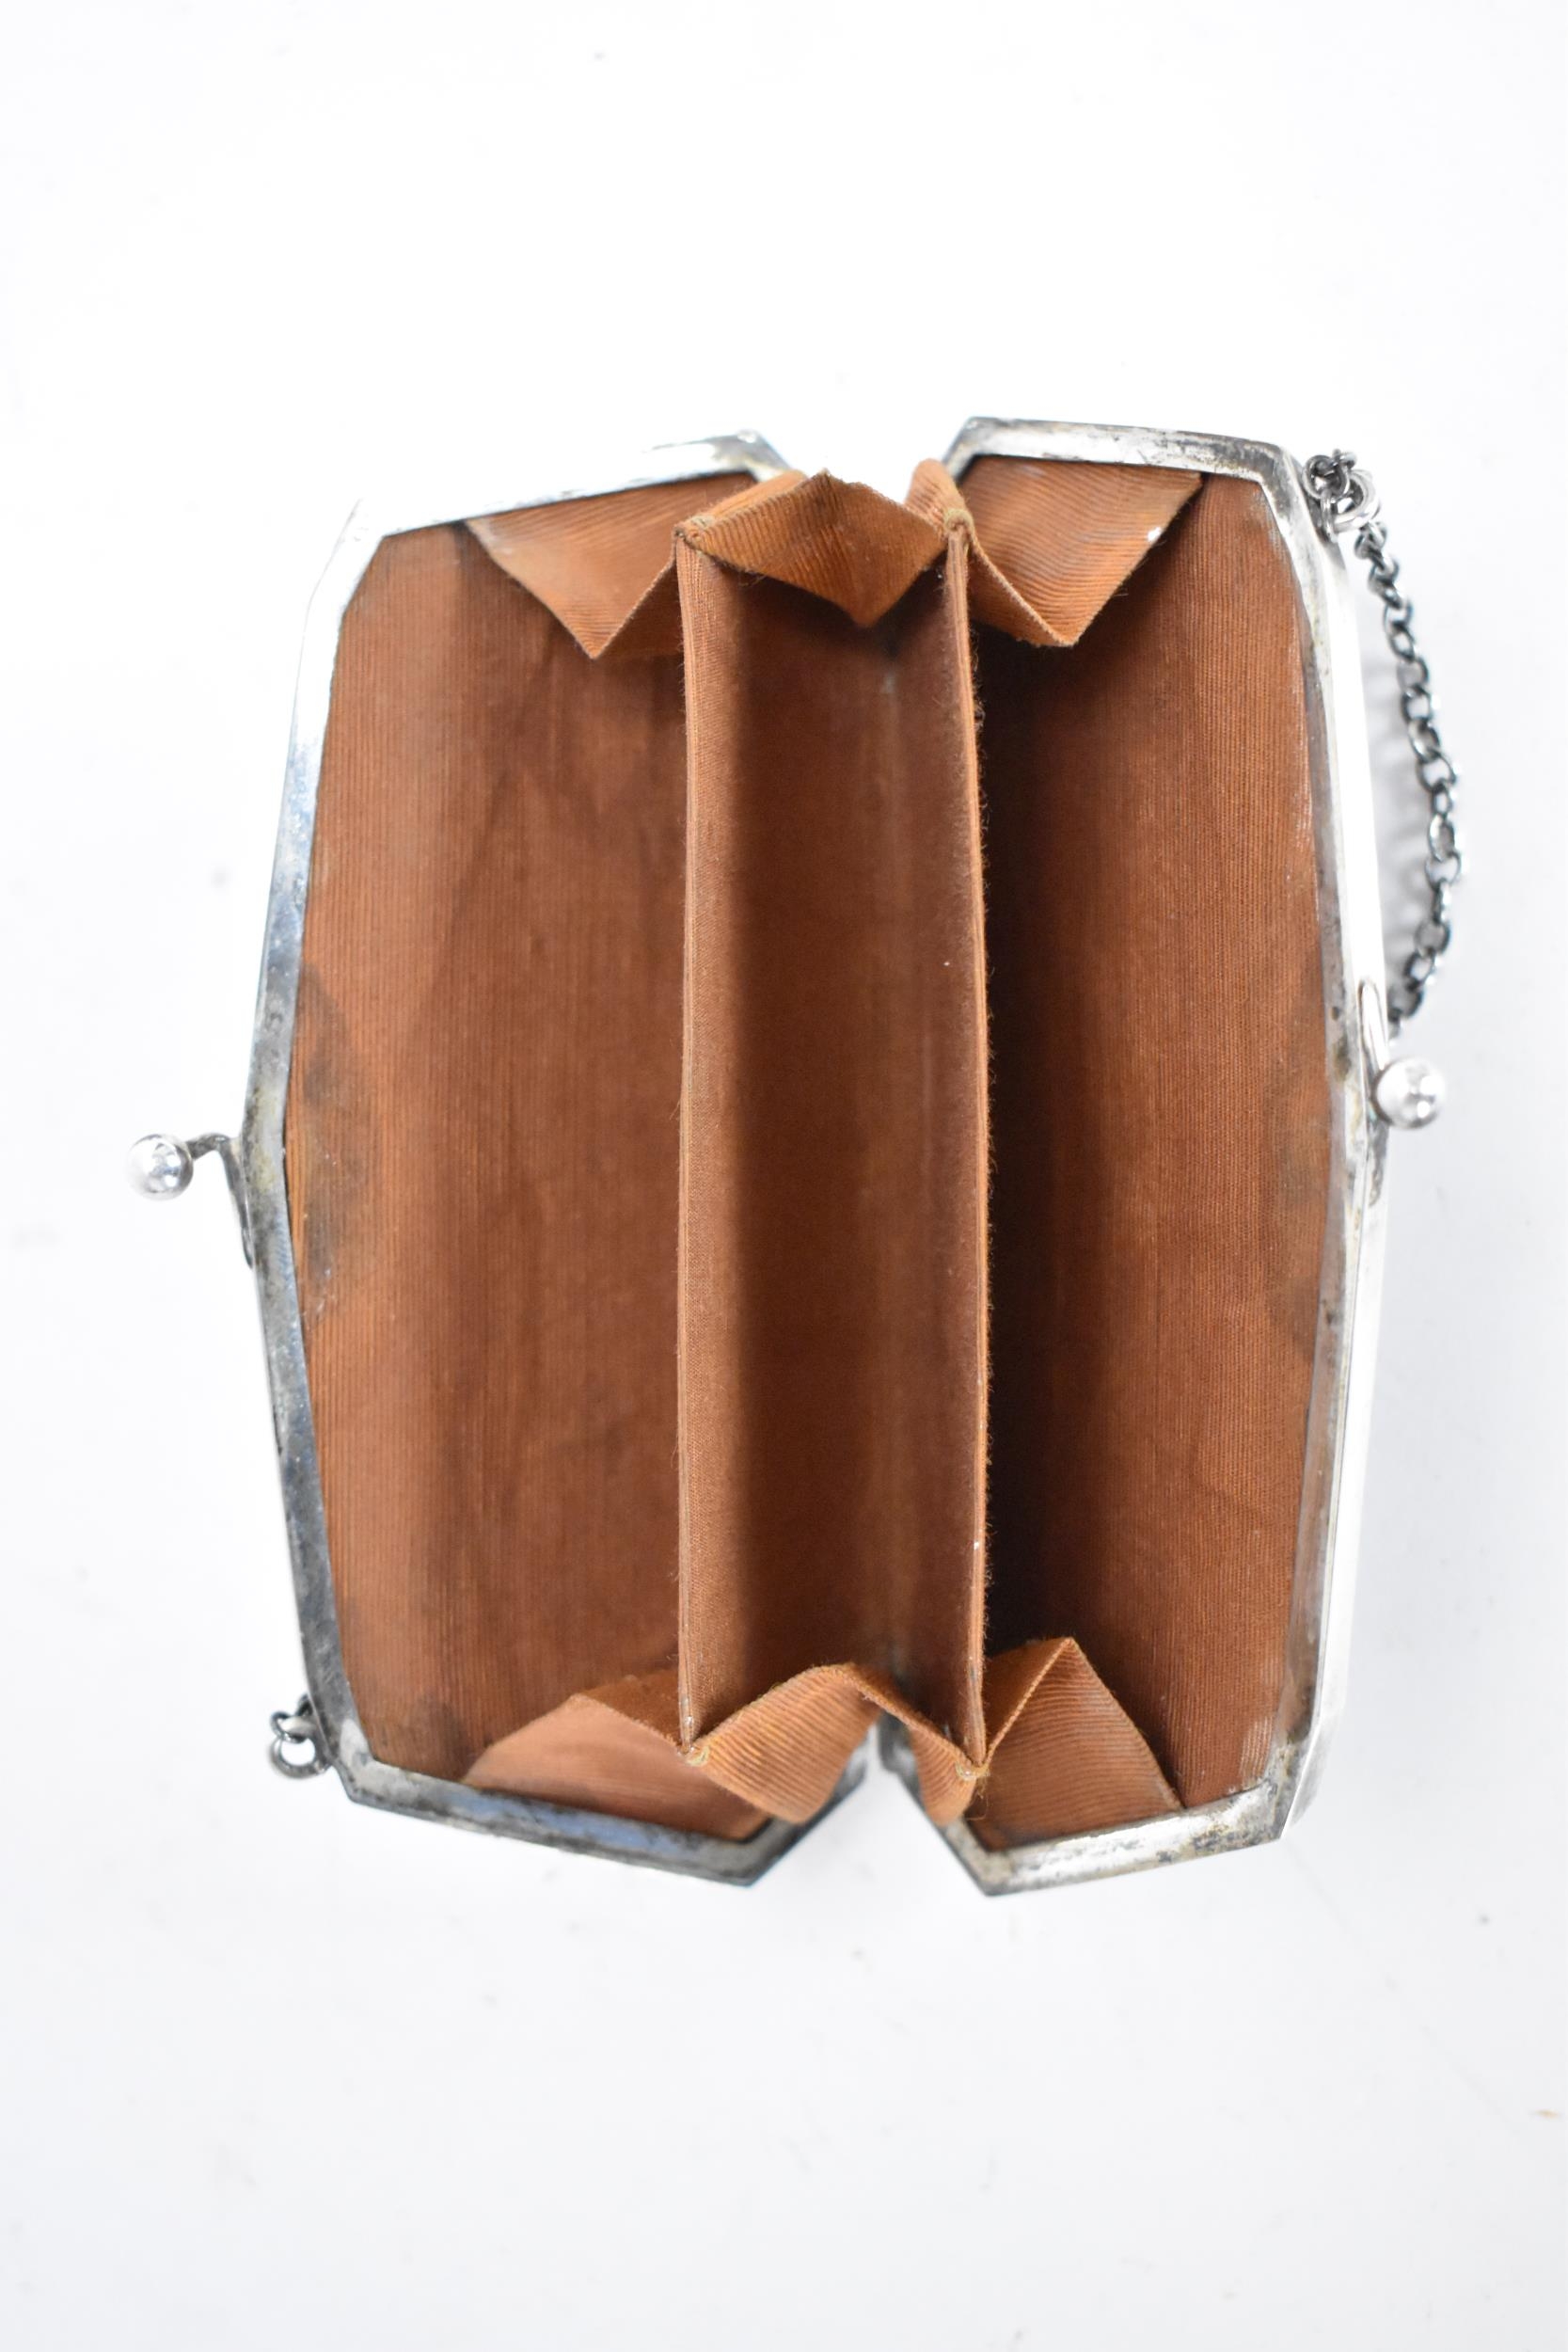 A George V tortoiseshell and silver purse, with suspension chain, Adams style silver inlaid - Image 8 of 8